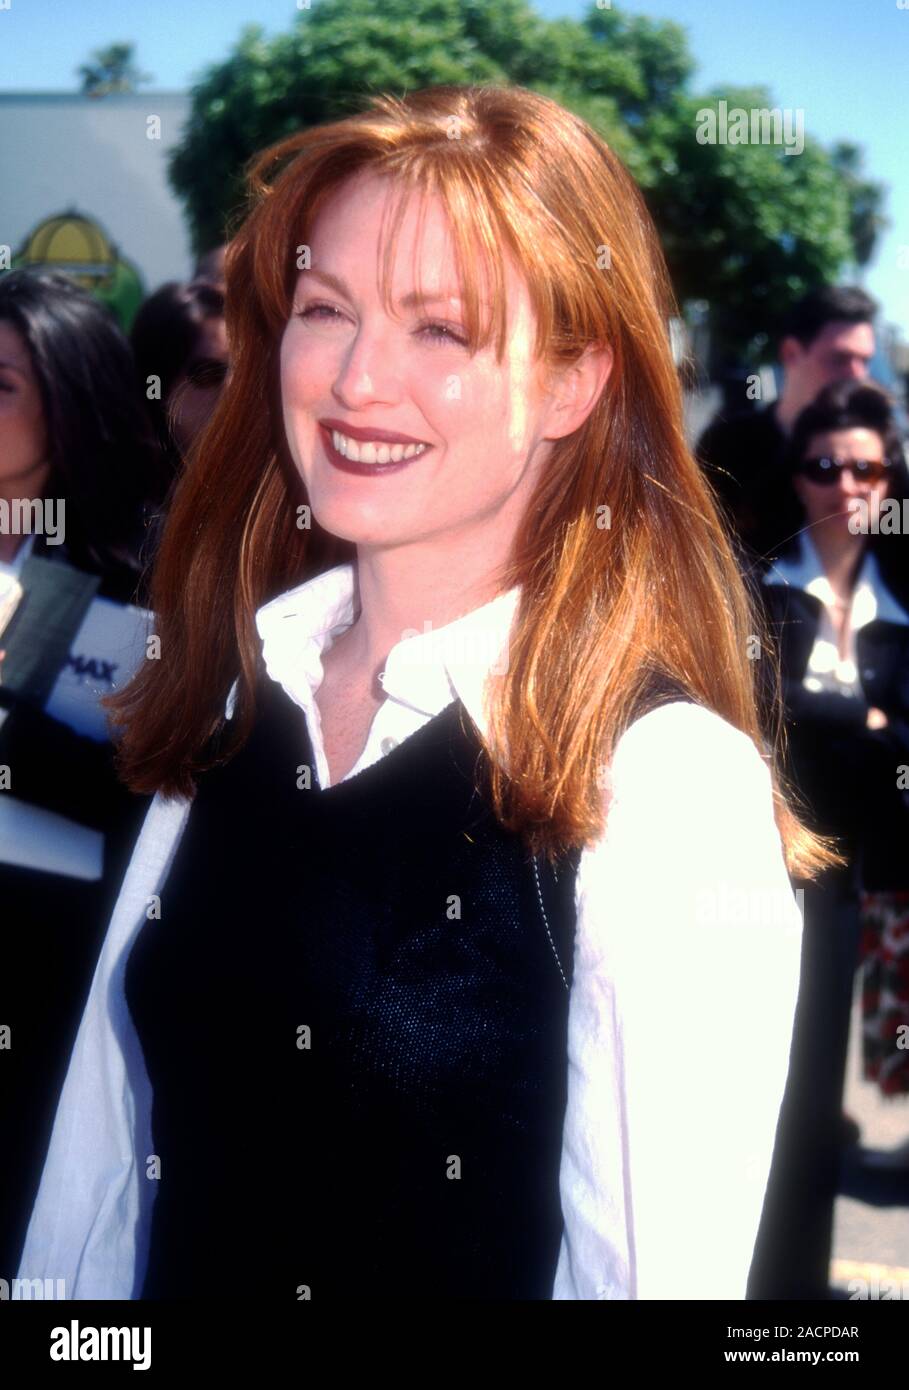 Santa Monica, California, USA 27th March 1995 Actress Julianne Moore attends the 10th Annual Independent Spirit Awards on March 27, 1995 at Santa Monica Beach in Santa Monica, California, USA. Photo by Barry King/Alamy Stock Photo Stock Photo